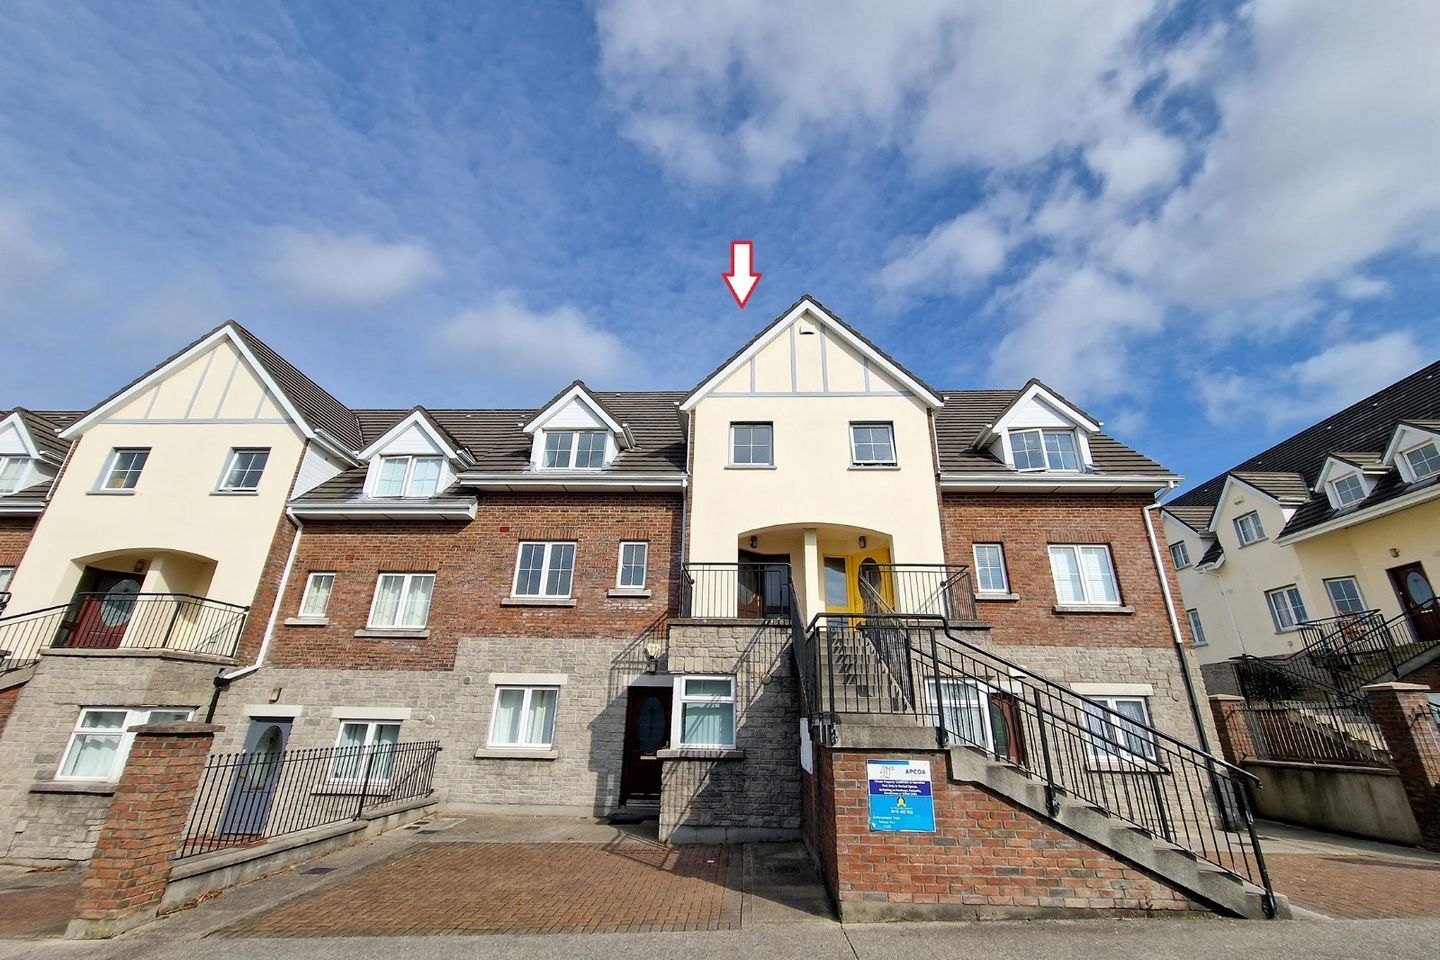 47 Cathedral Court, Clare Road, Ennis, Co. Clare